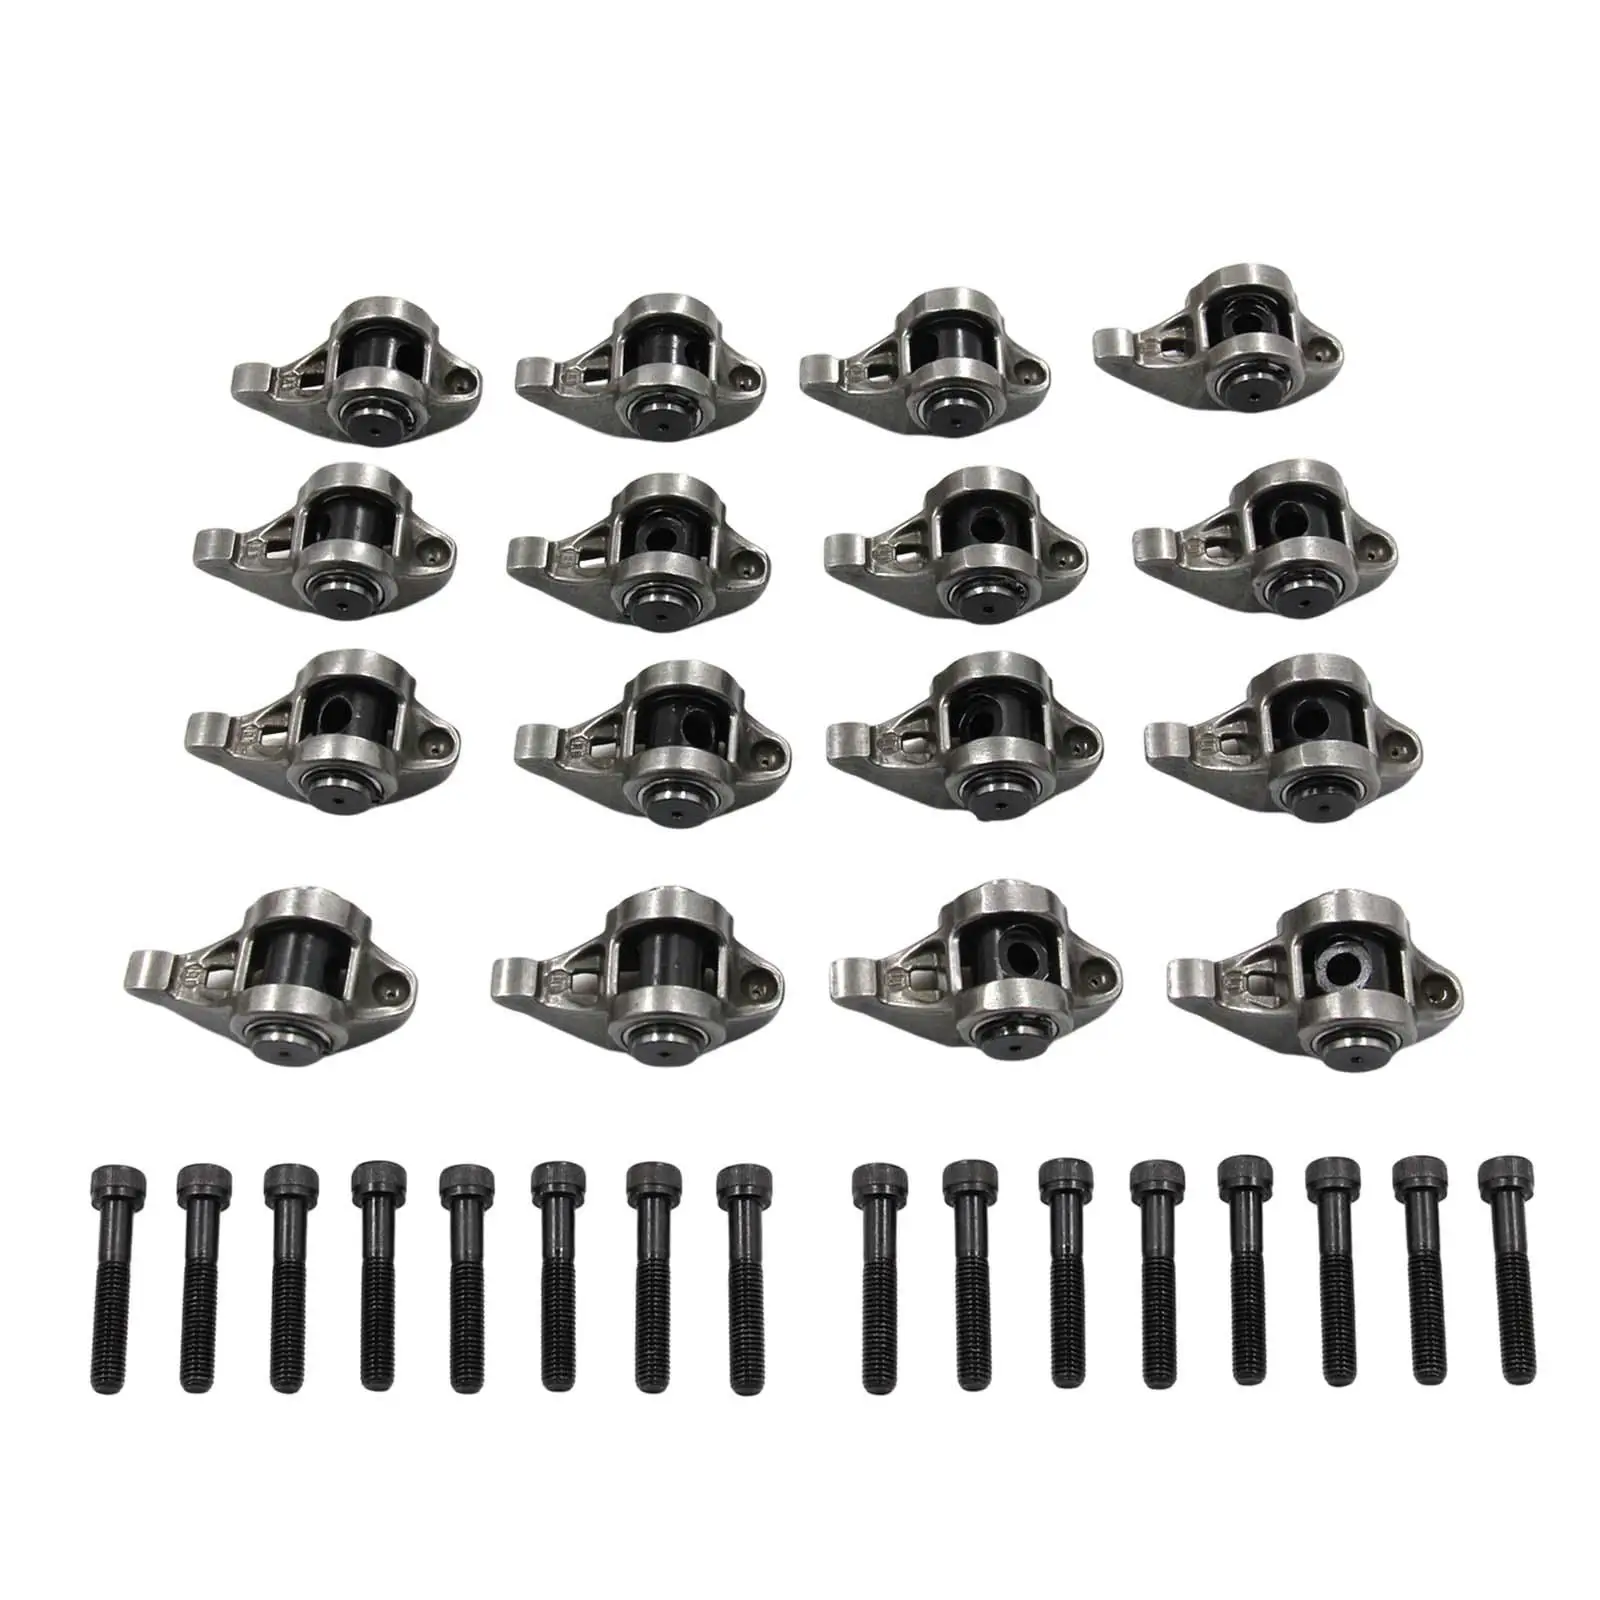 16Pcs Rocker Arms and Bolts Kit 10214664 High Quality Steel Accessory for LS1